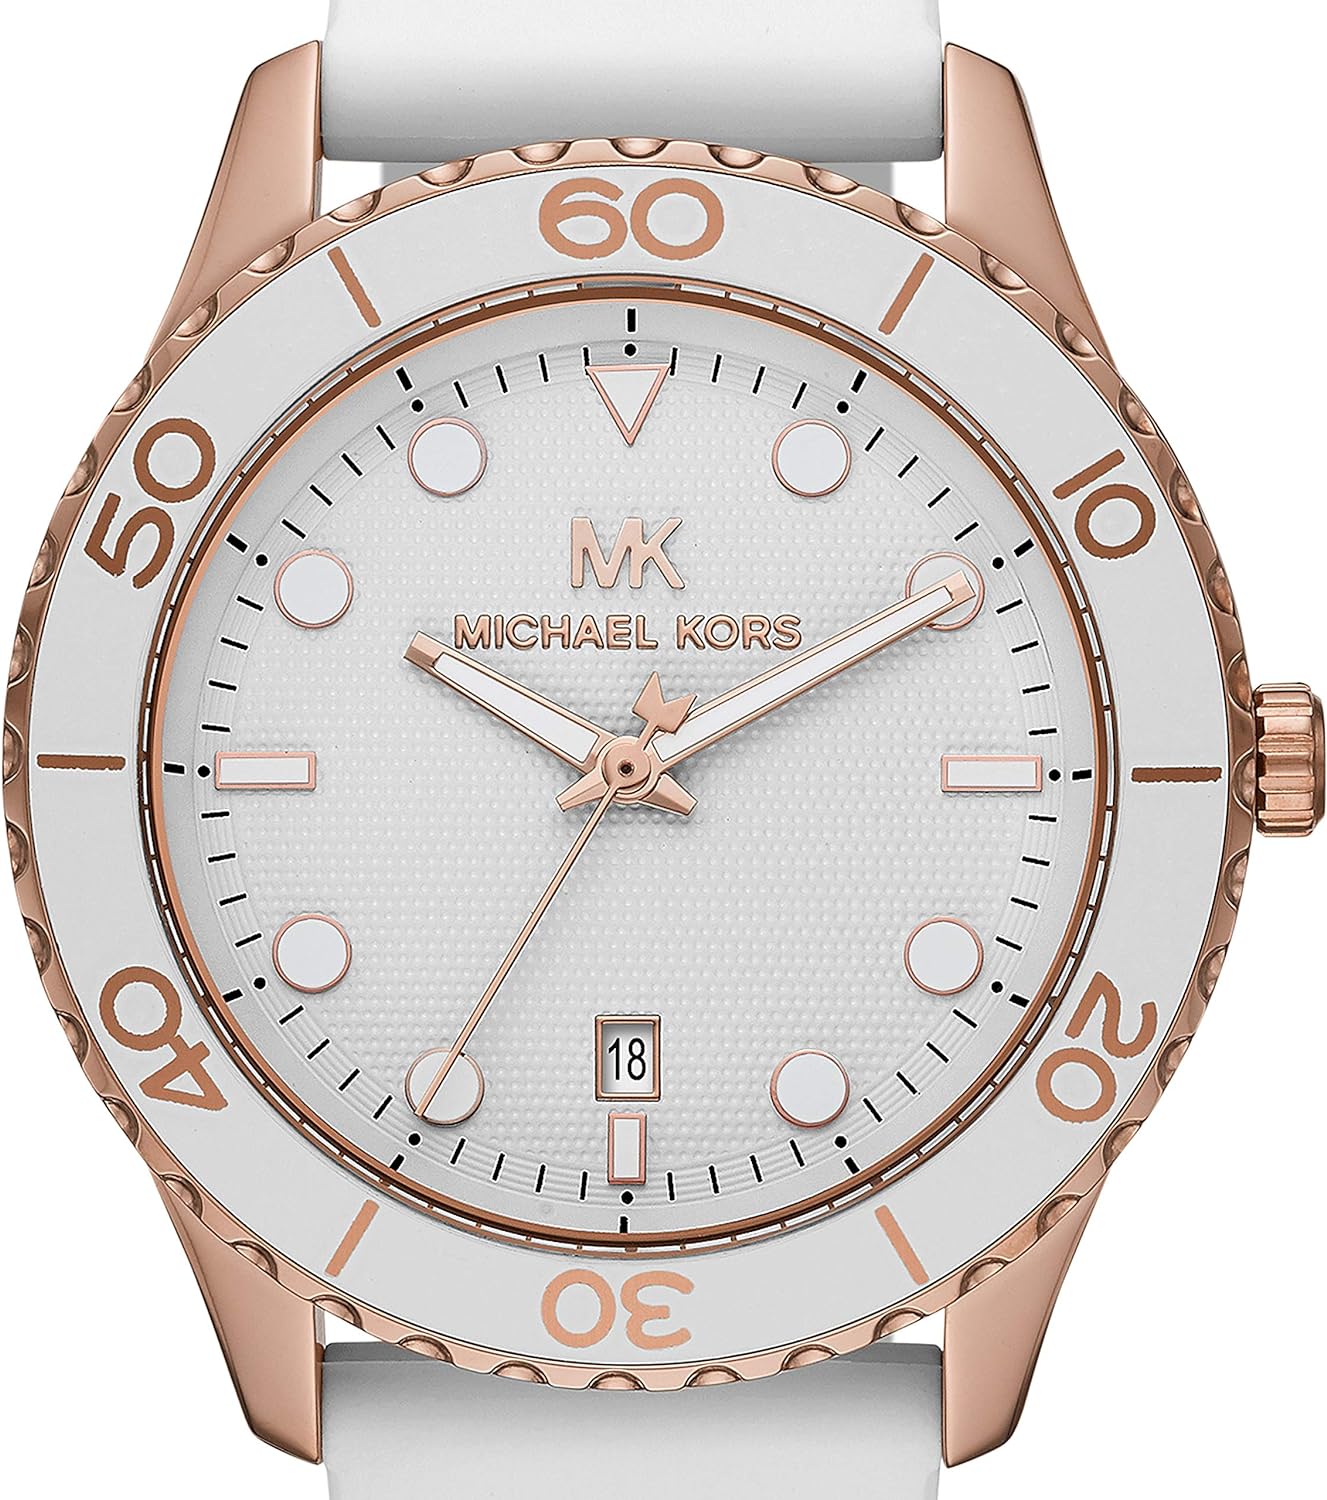 ĐỒNG HỒ MICHAEL KORS RUNWAY DIVE OVERSIZED ROSE GOLD-TONE SILICONE STRAP WATCH MK6853 4